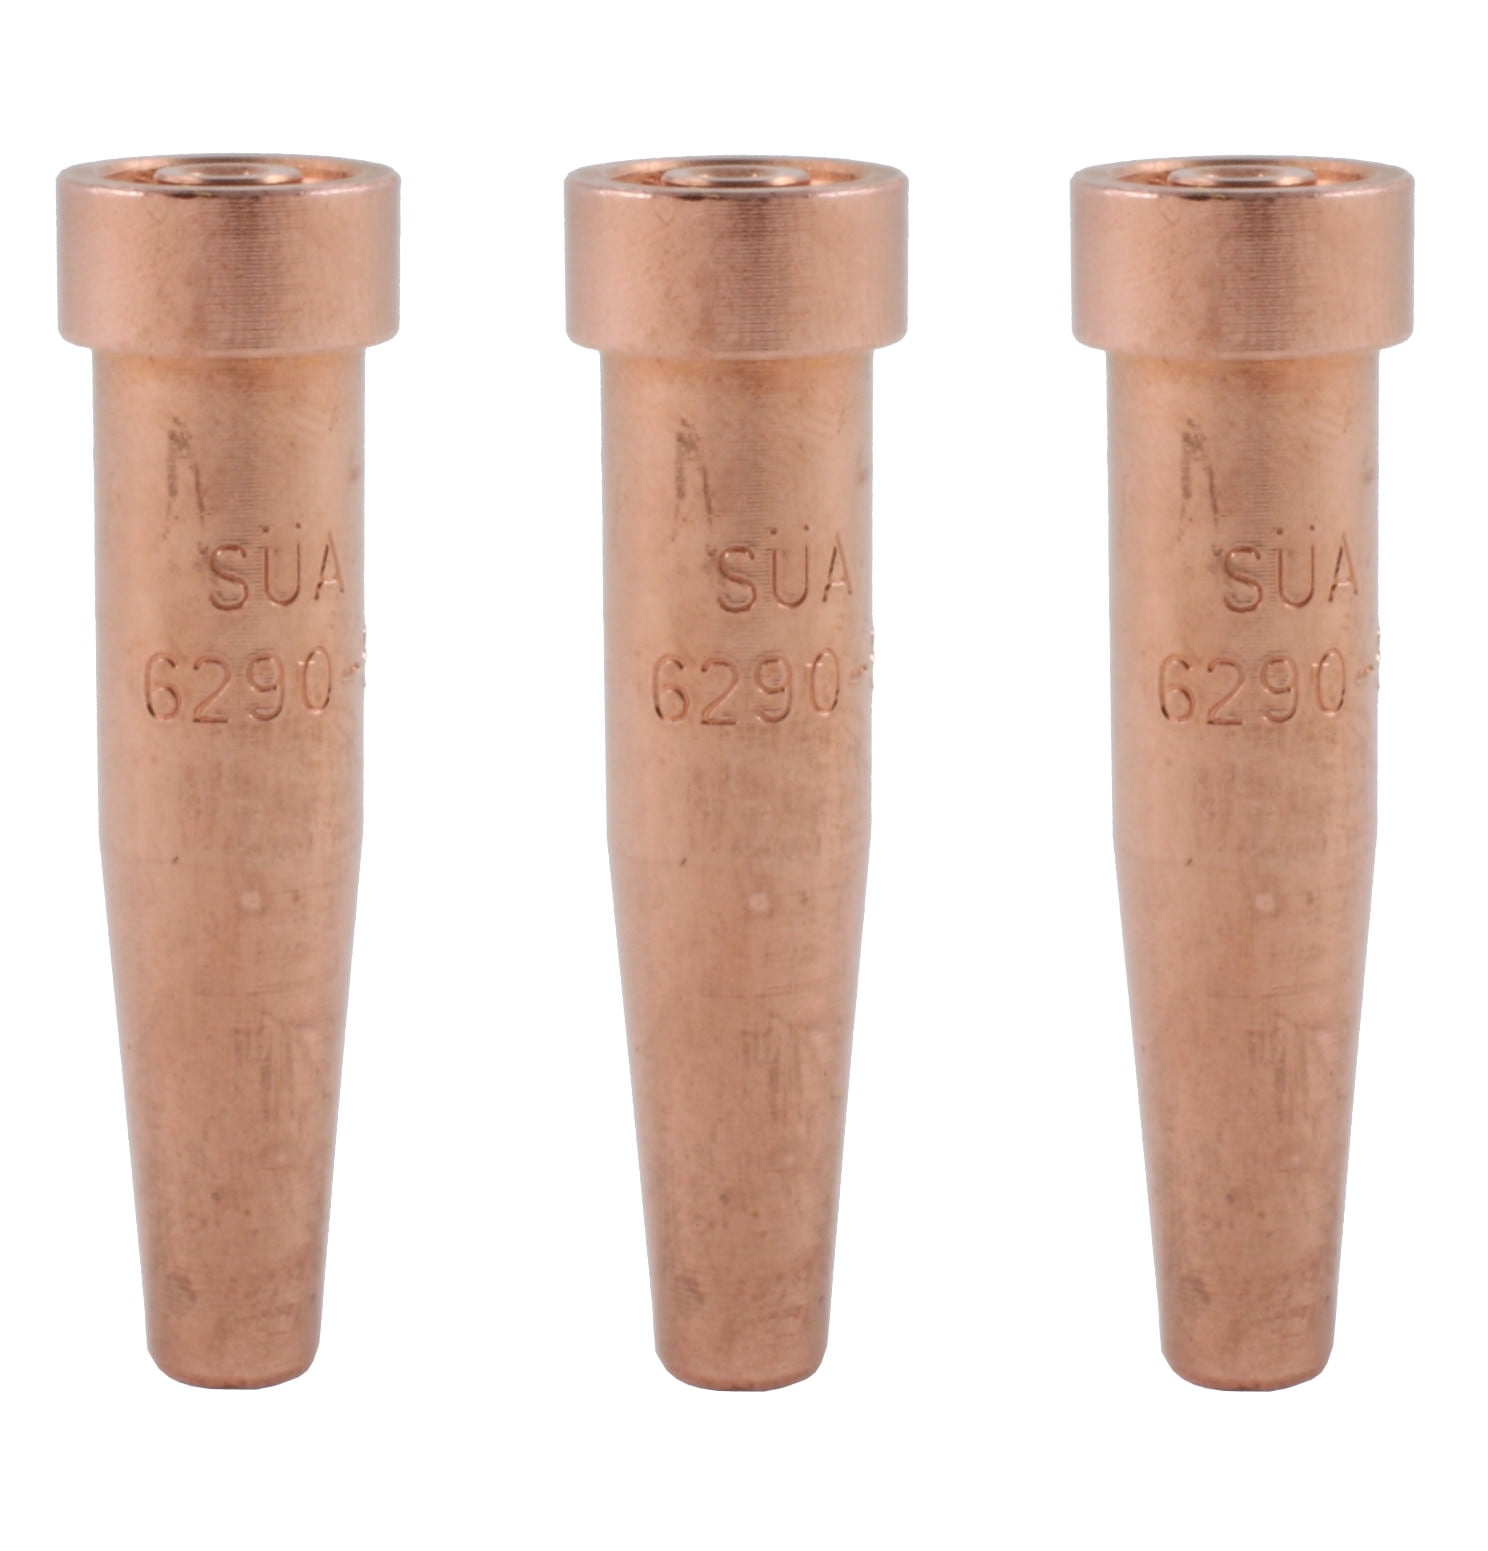 Compatible with Harris #4 3 PACK SÜA 6290-4 Acetylene Cutting Tip 